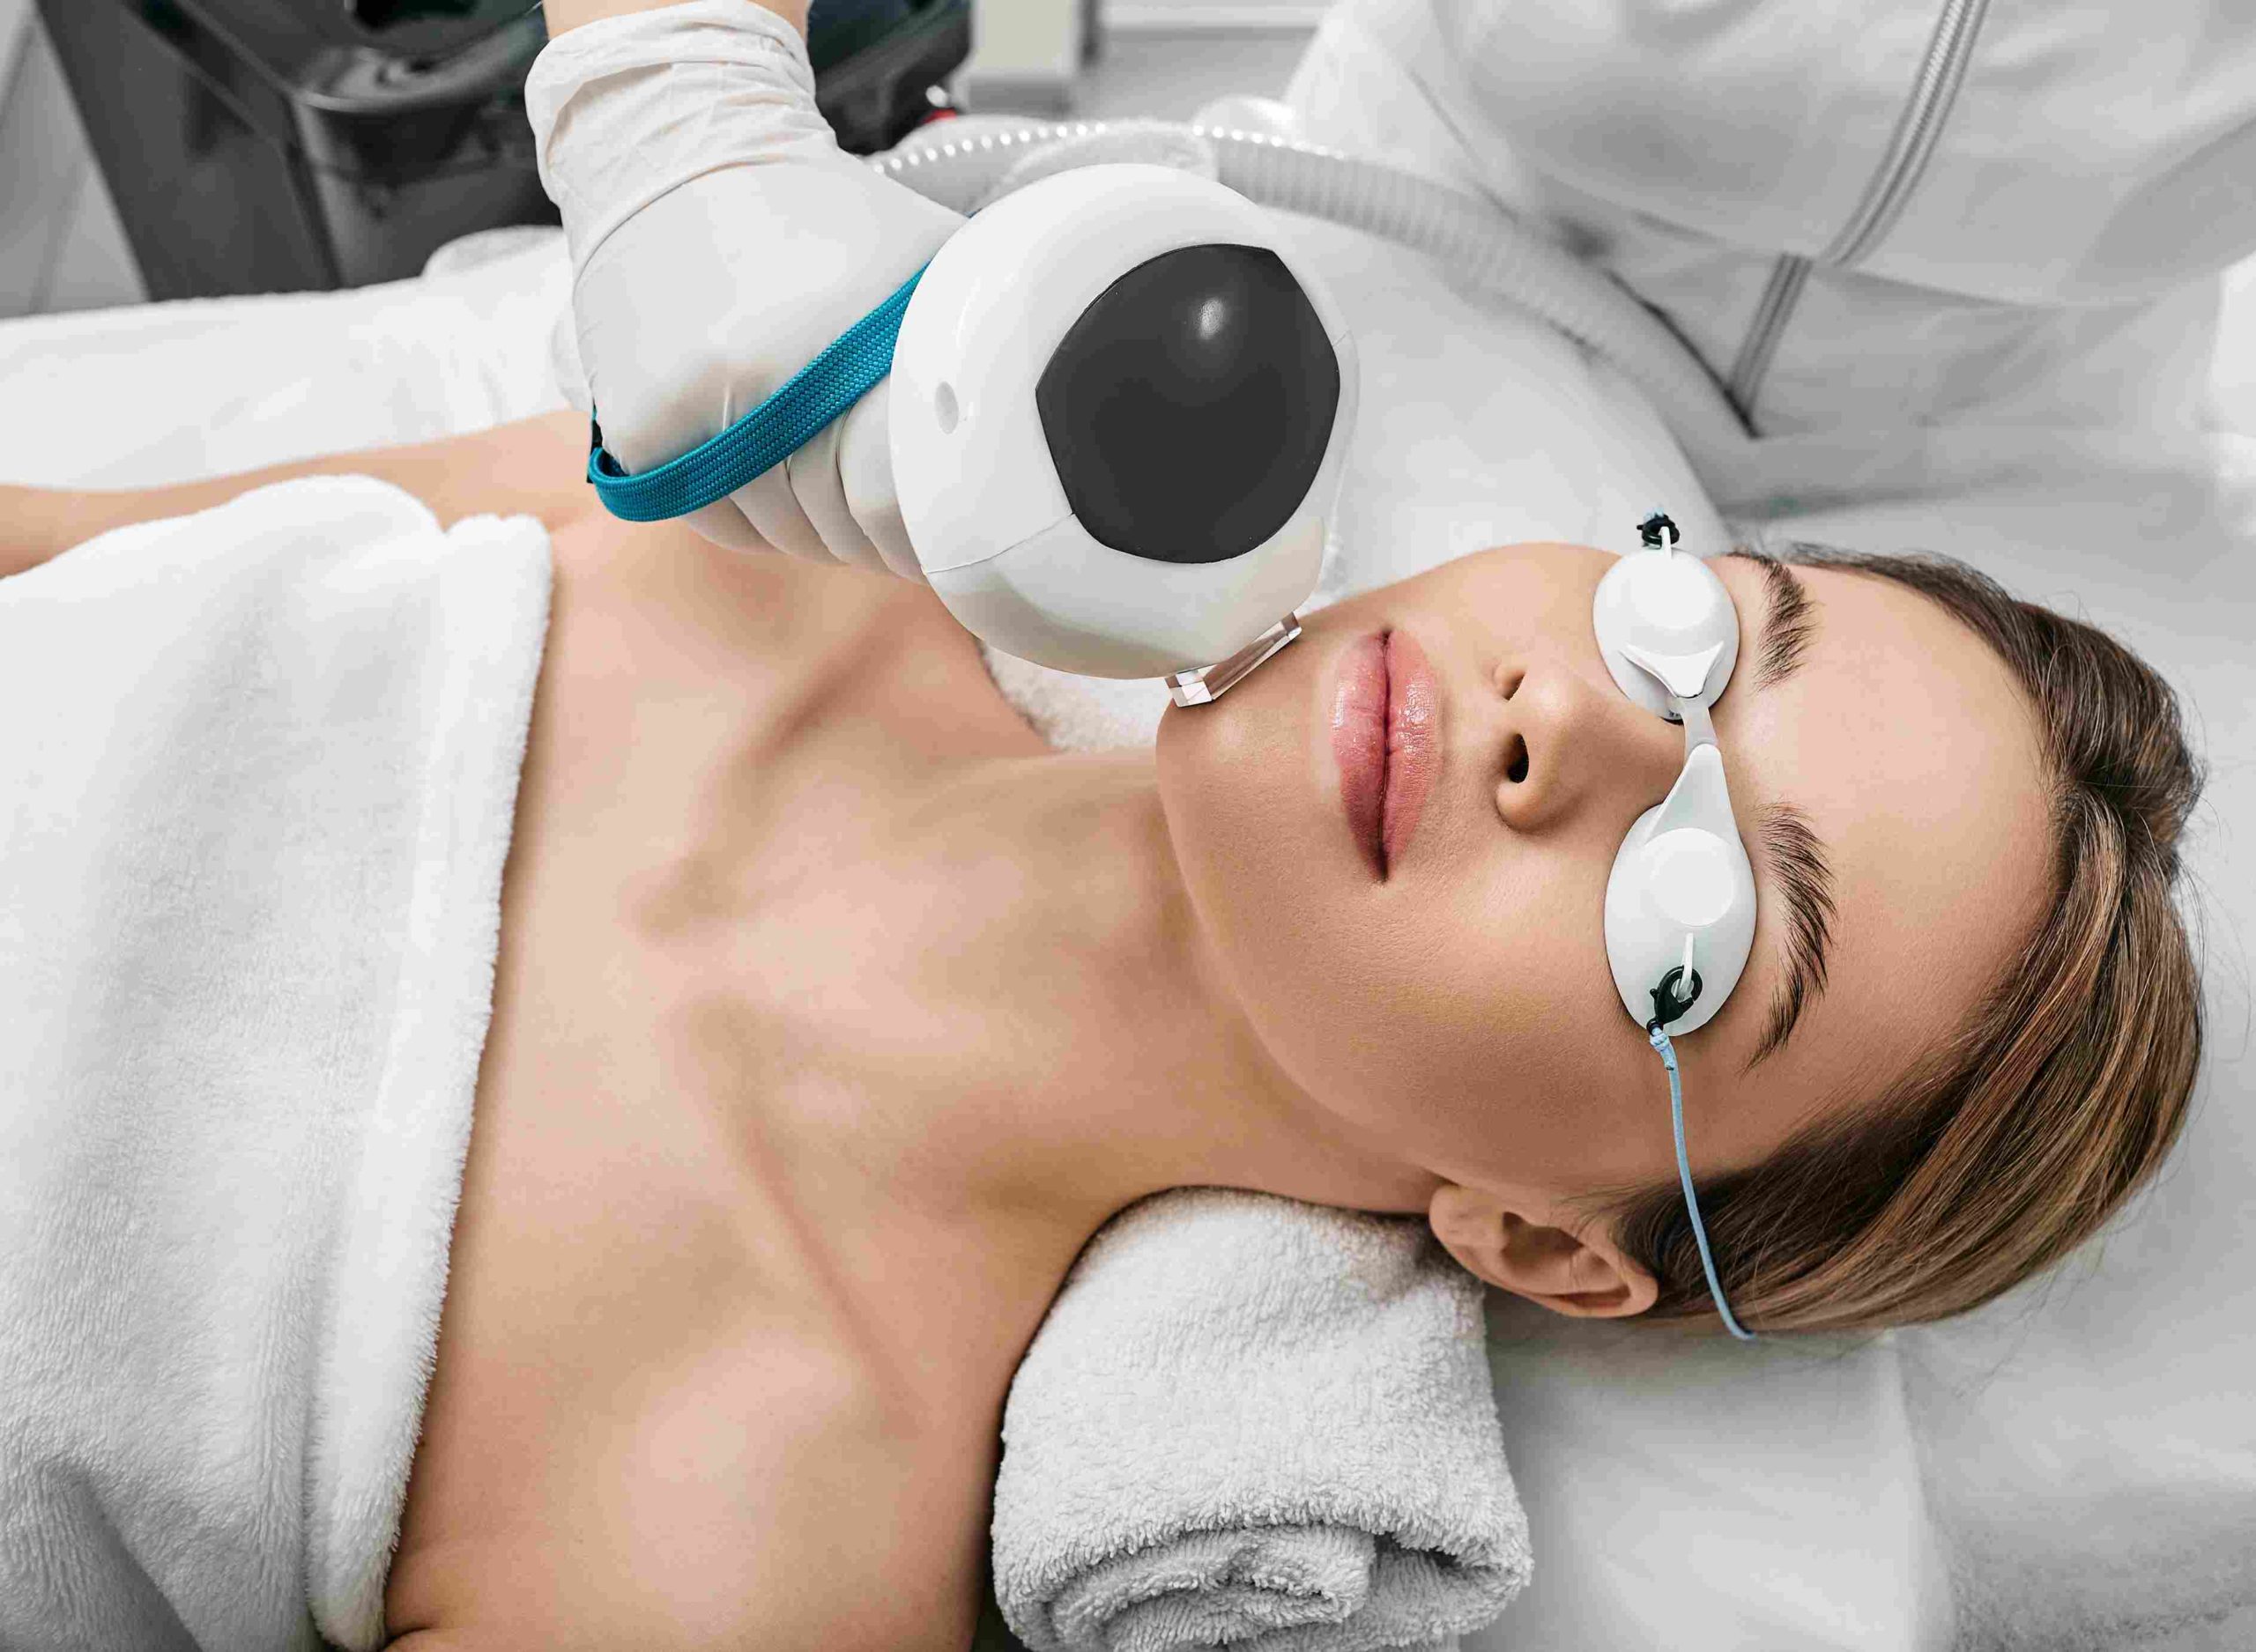 Young Girl Getting ThreeForMe Laser Treatment by Wearing Safety Goggles | Avail Aesthetics in Cary, NC